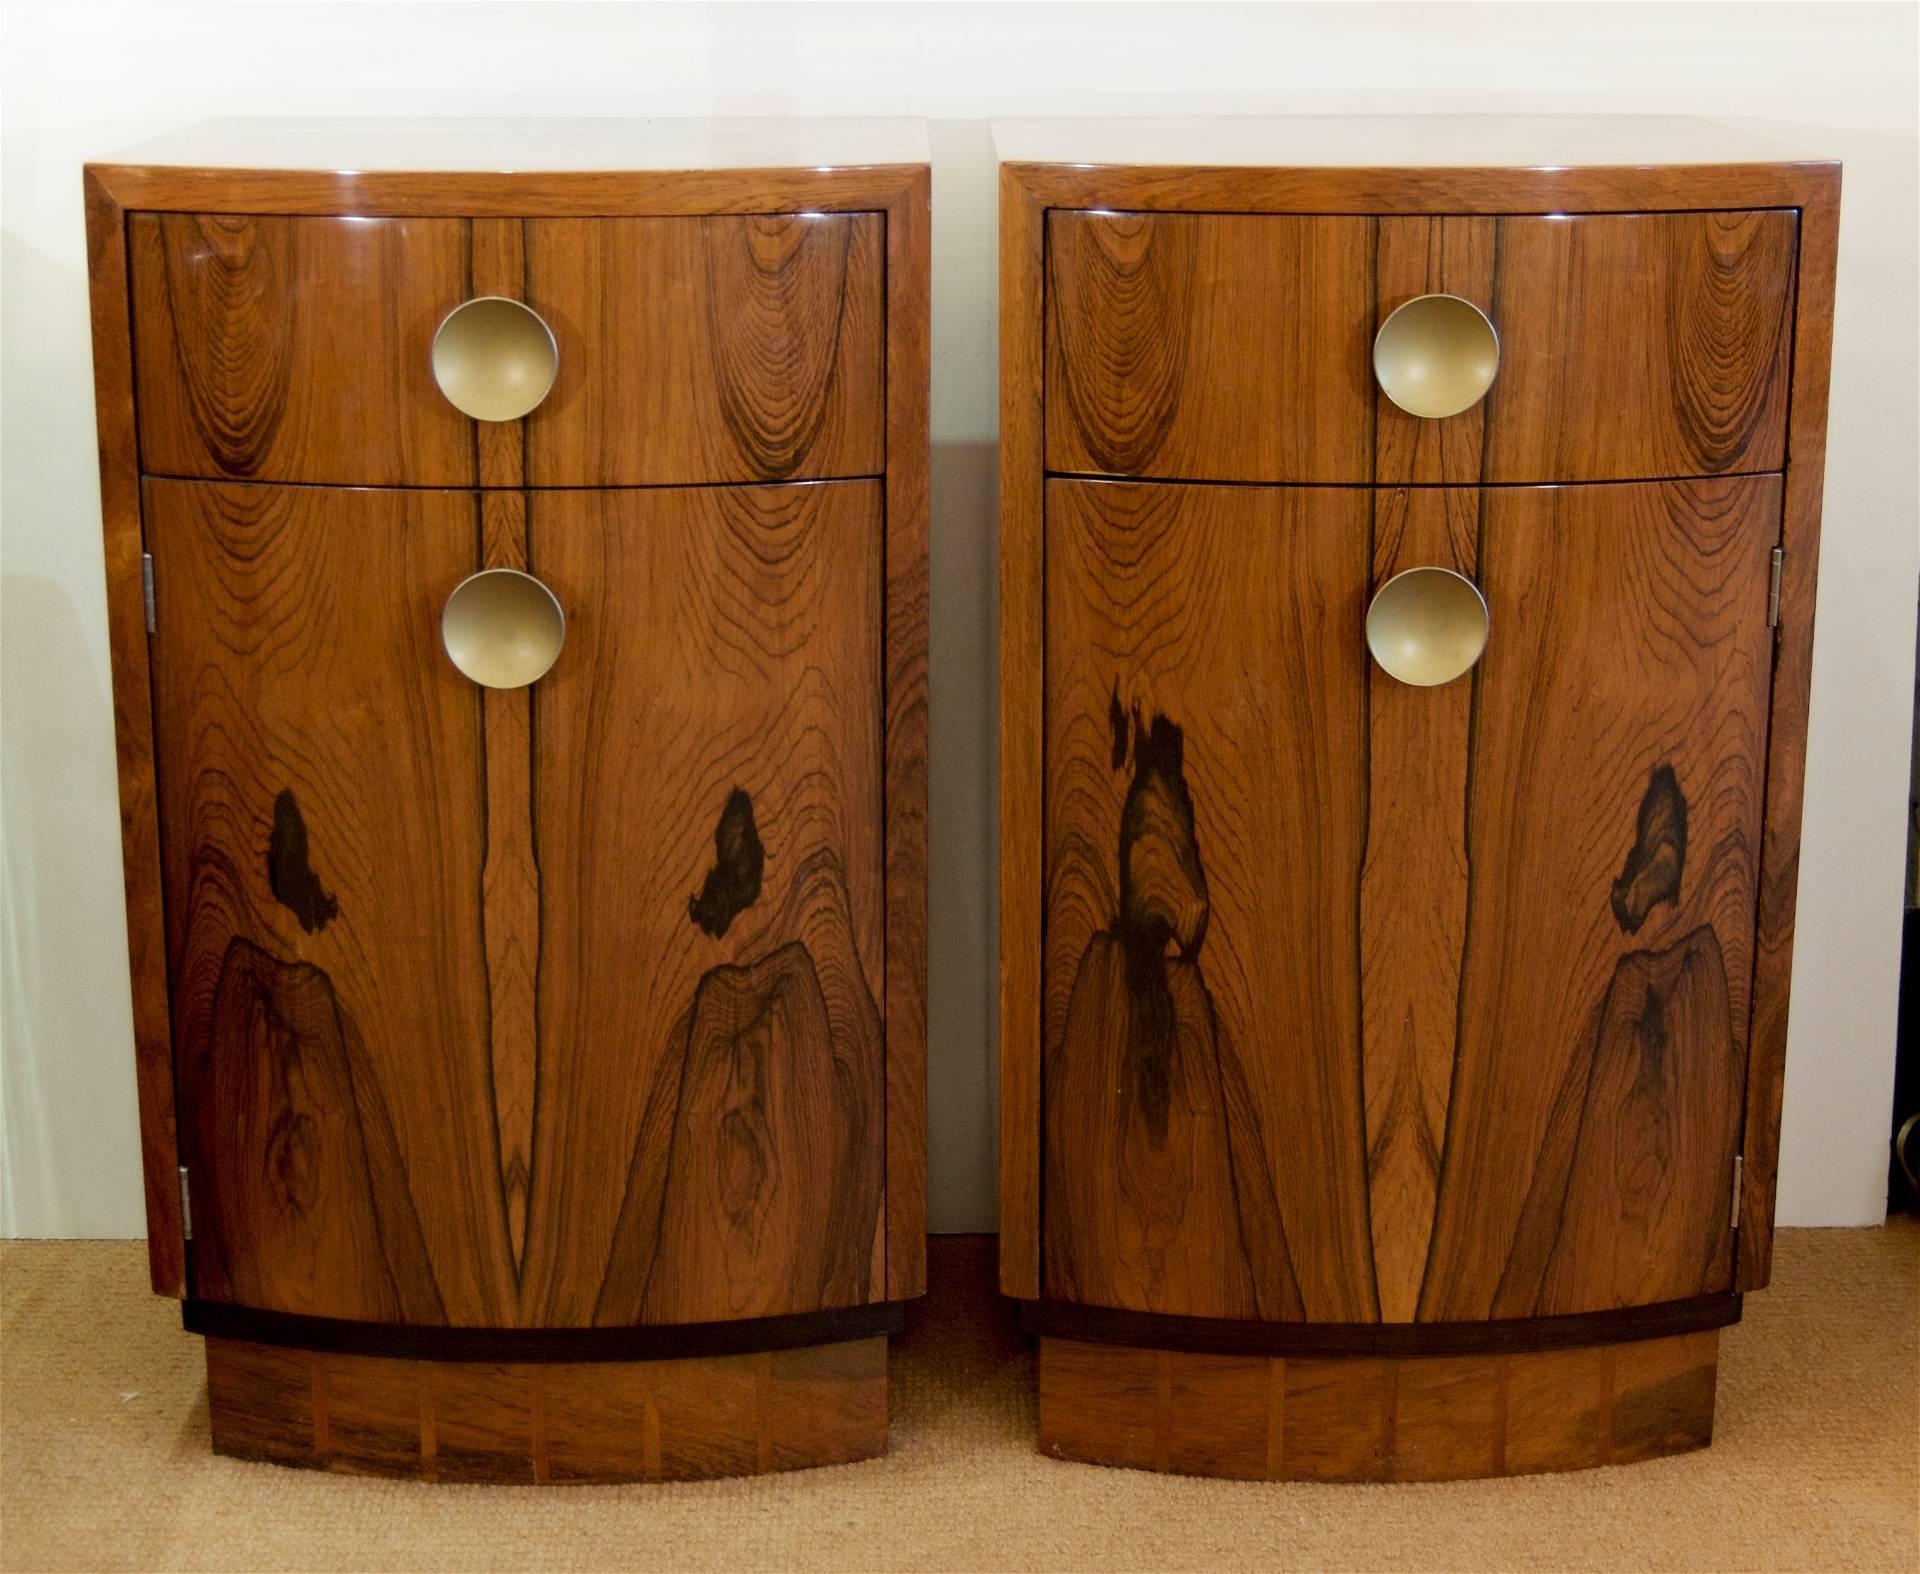 Pair of Art Deco bookmatched rosewood veneer Gilbert Rohde nightstands by Herman Miller. Each nightstand has a drawer and interior compartment with circular brass pulls;

Pedestal base features interesting geometric striped inlay. Interior in